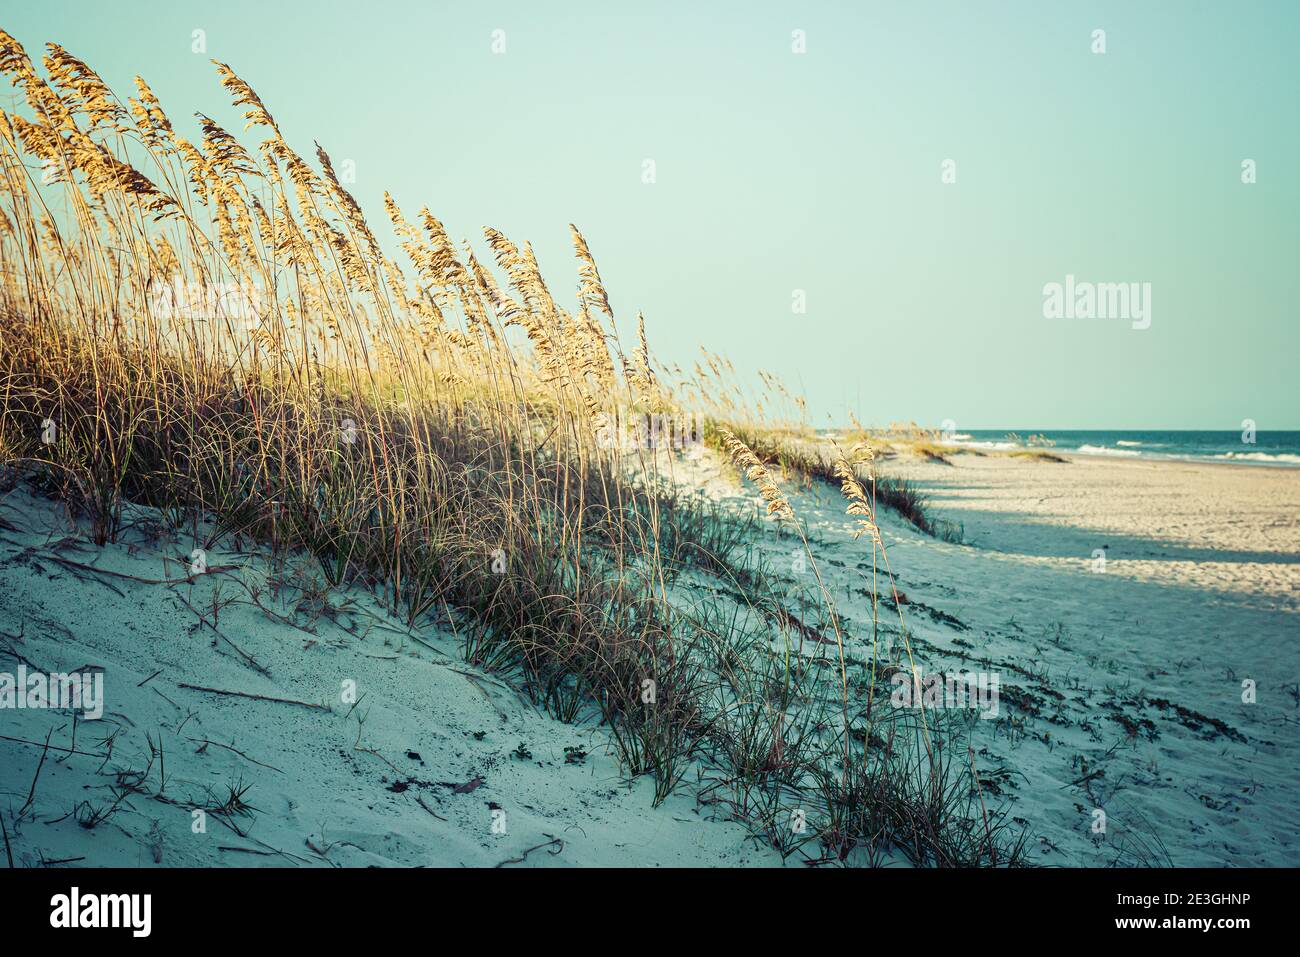 A serene pale view of sea grass covering the dunes in foreground with a distant Atlantic Ocean on Fernandina Beach, on Amelia Island, FL Stock Photo